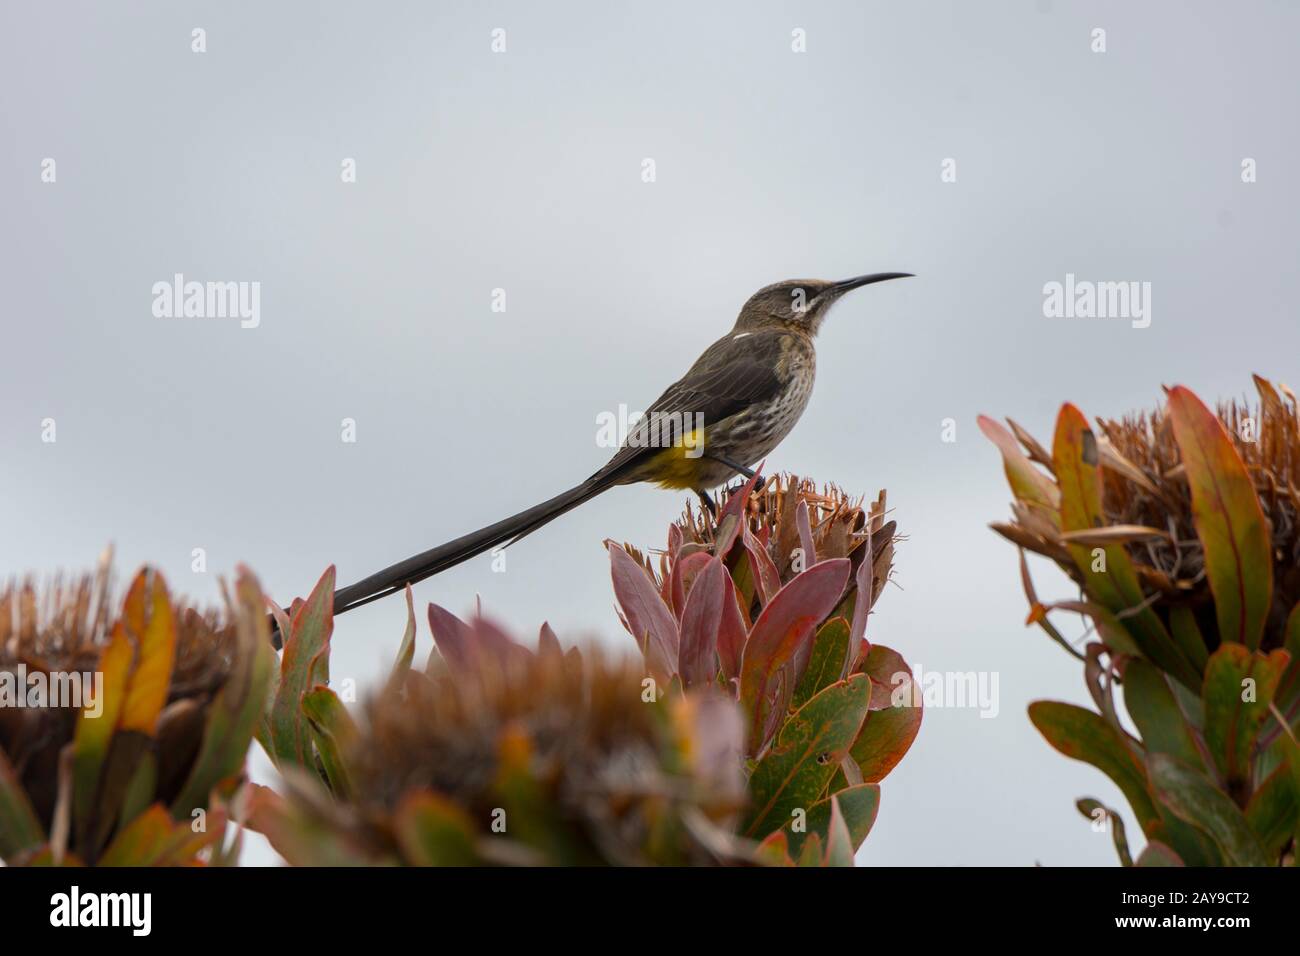 A Cape Sugarbird (Promerops cafer) is sitting on a protea flower in the vineyards of the Vergelegen historic wine estate in Somerset West, in the West Stock Photo